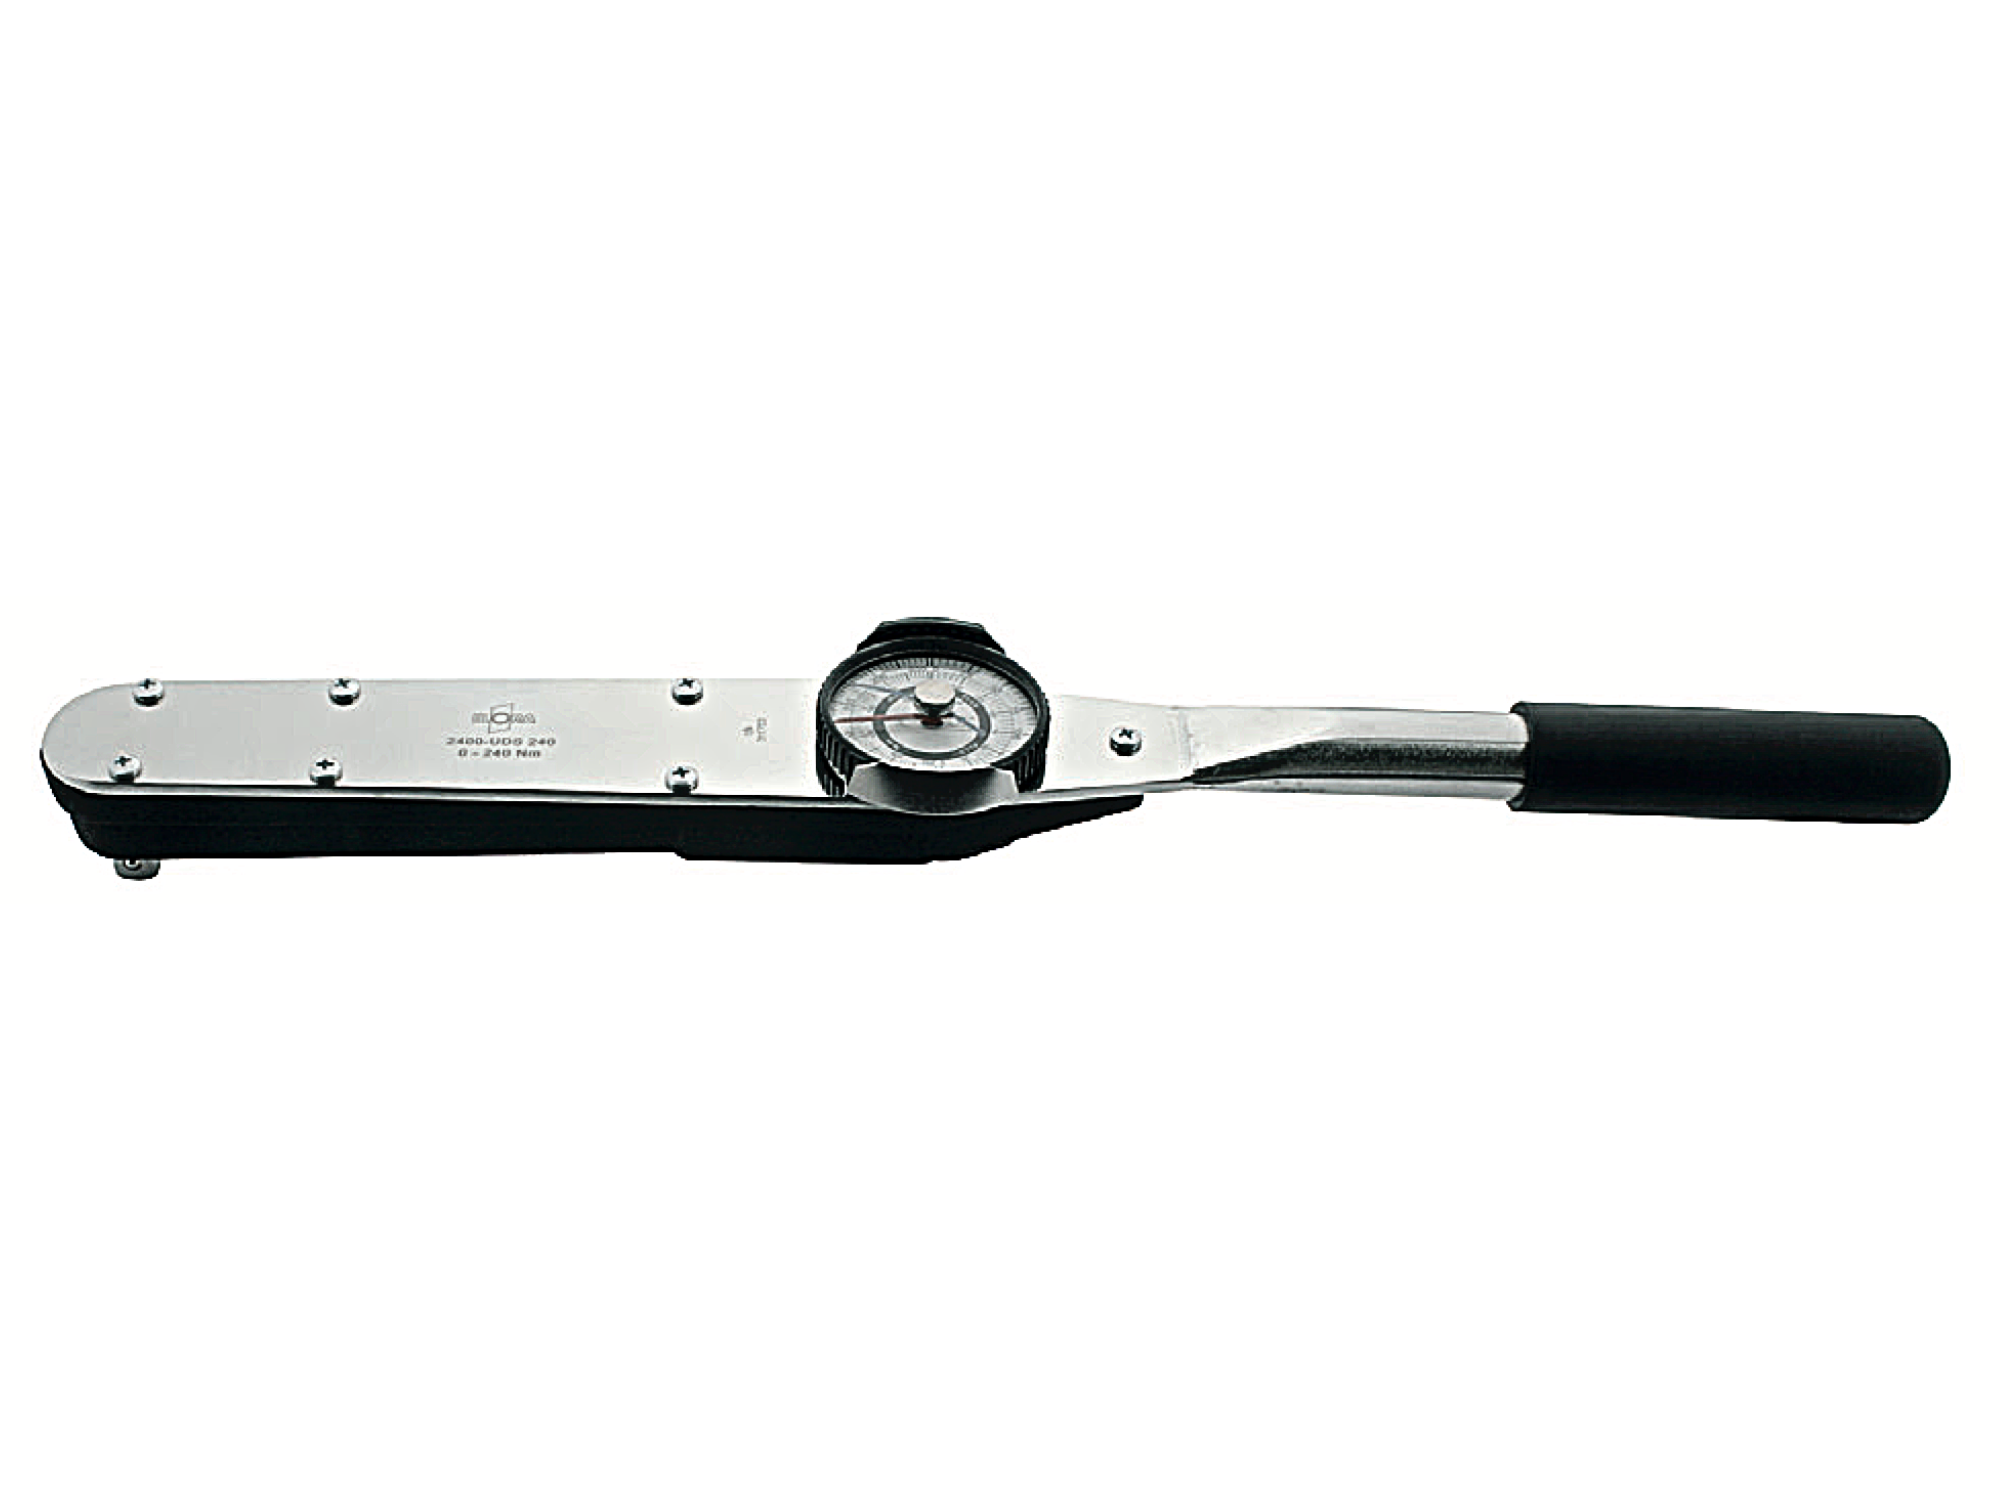 ELORA 2400-UDS240/350 Elometer 1/2" Torque Wrench With Drag - Premium 1/2" Torque Wrench from ELORA - Shop now at Yew Aik.